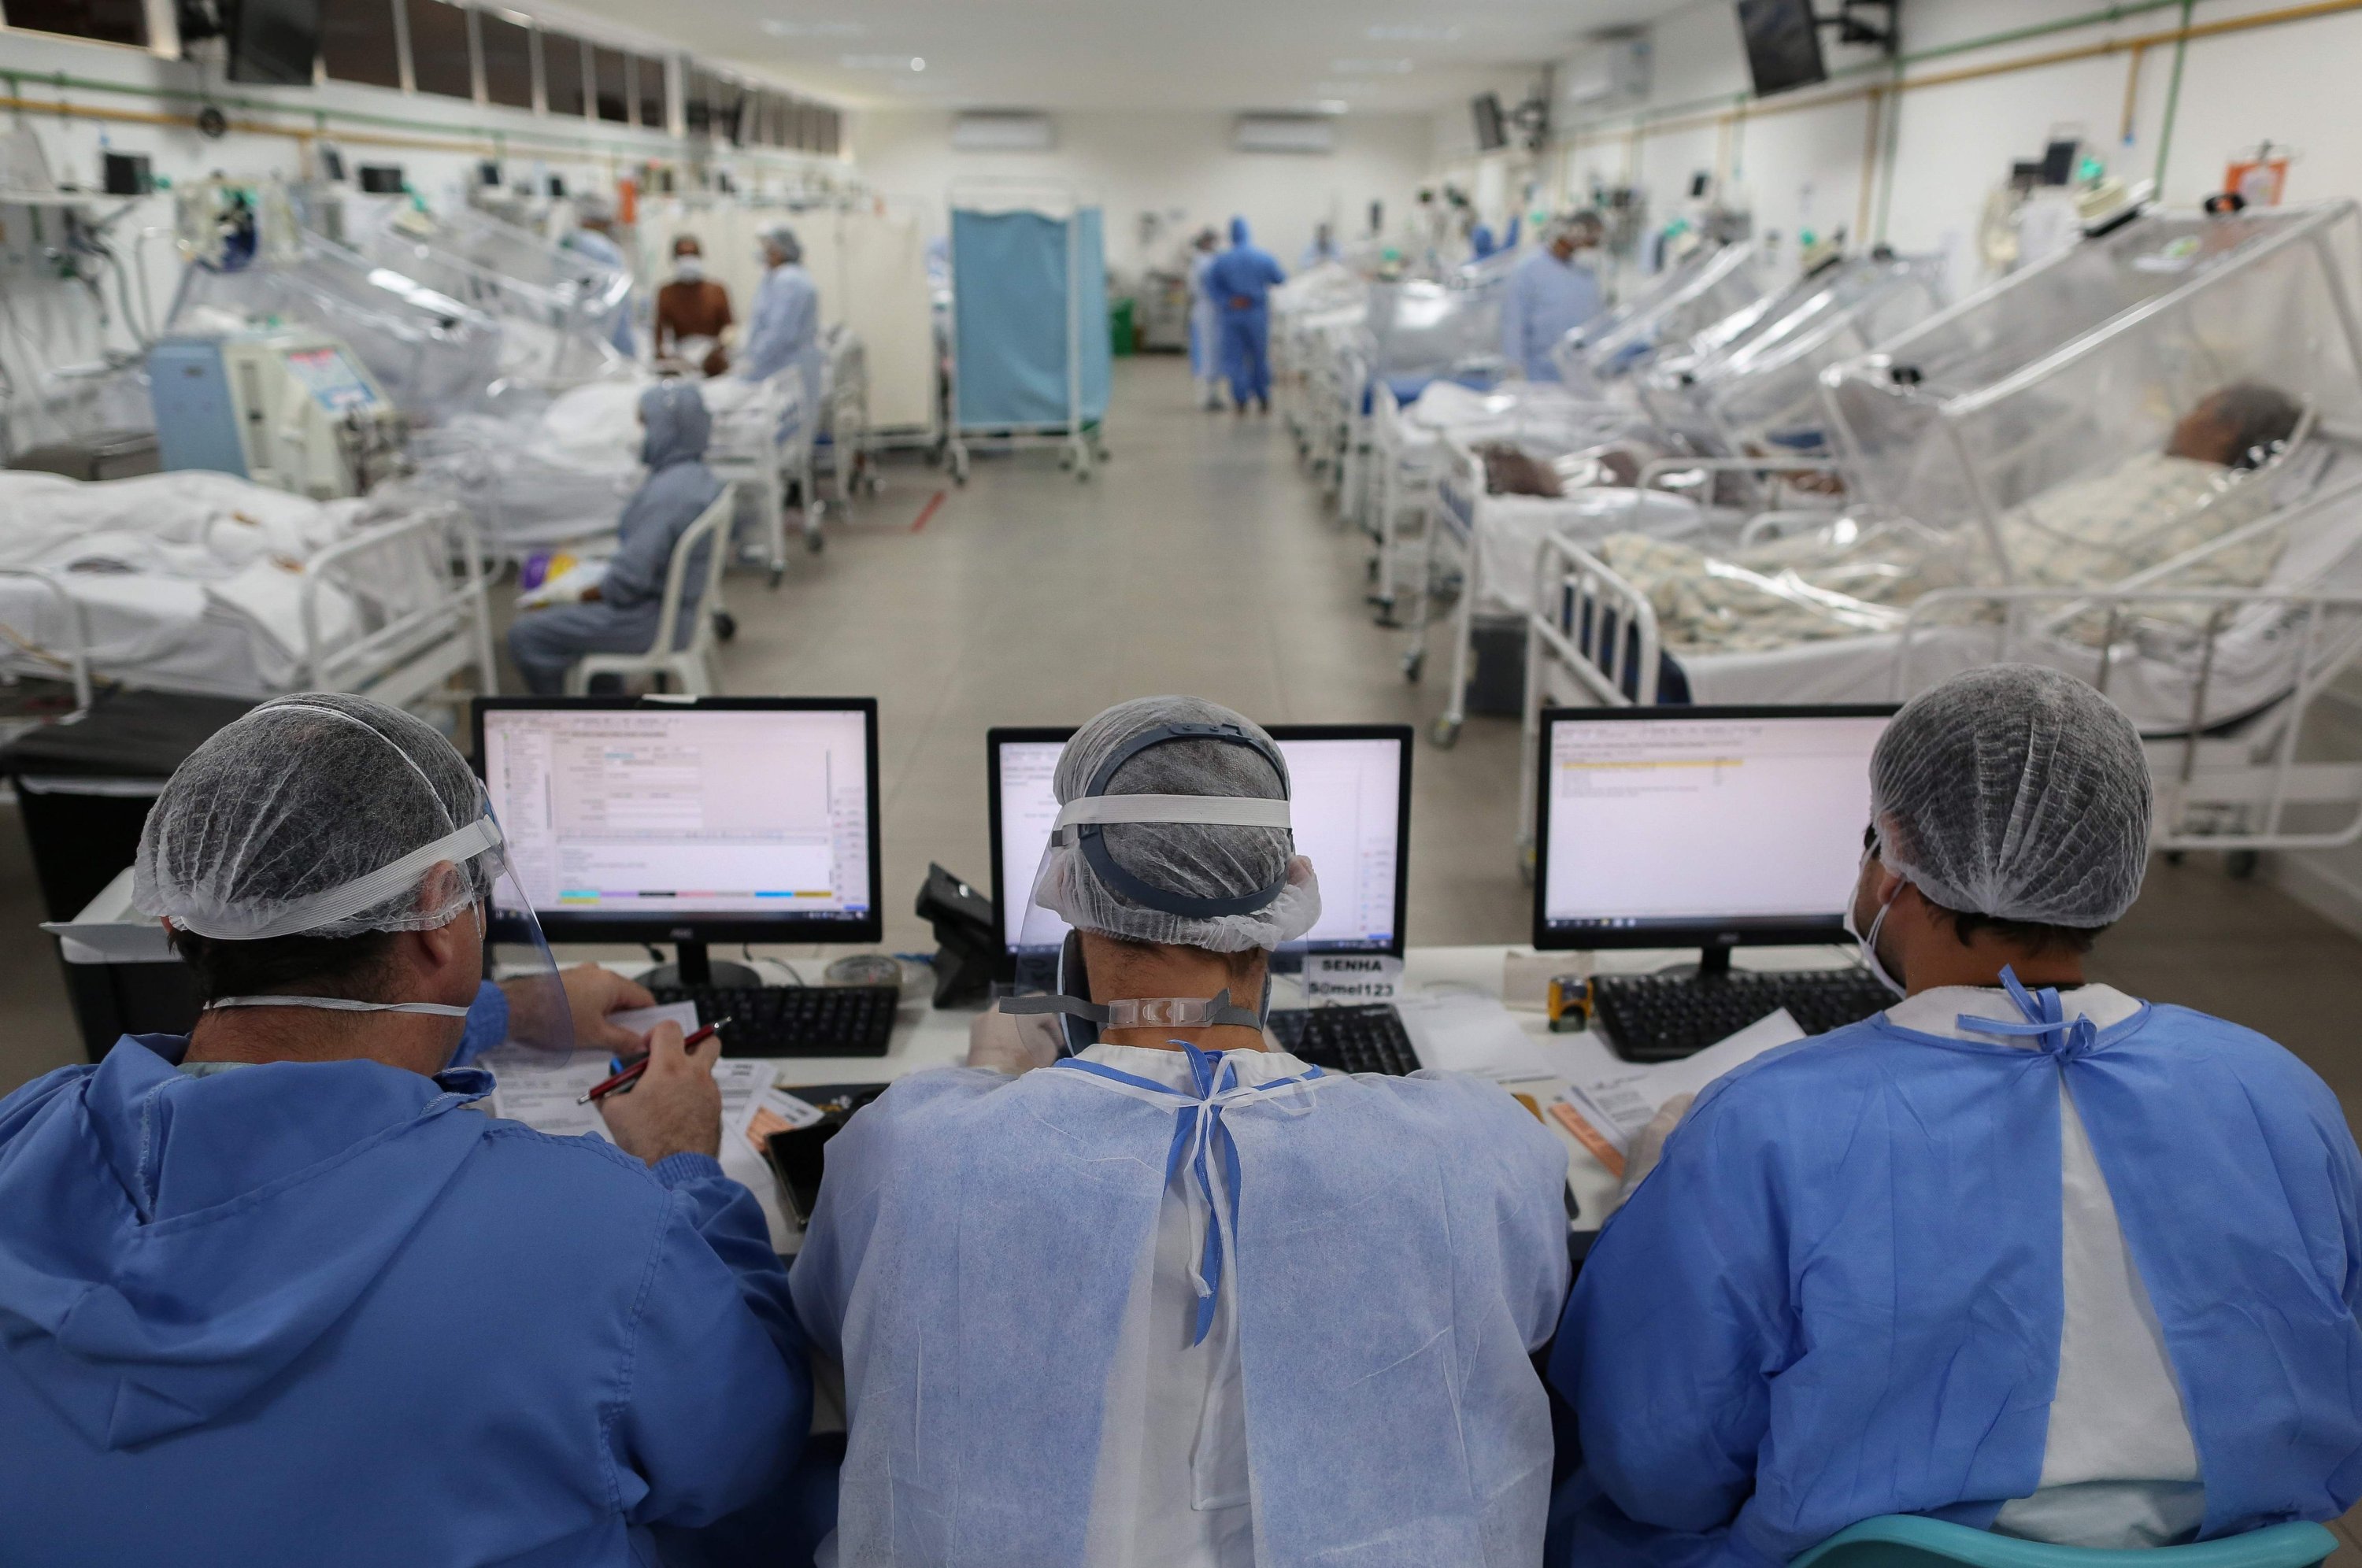 A view of the intensive care unit treating COVID-19 patients at the Gilberto Novaes Hospital in Manaus, Brazil, May 20, 2020. (AFP Photo)